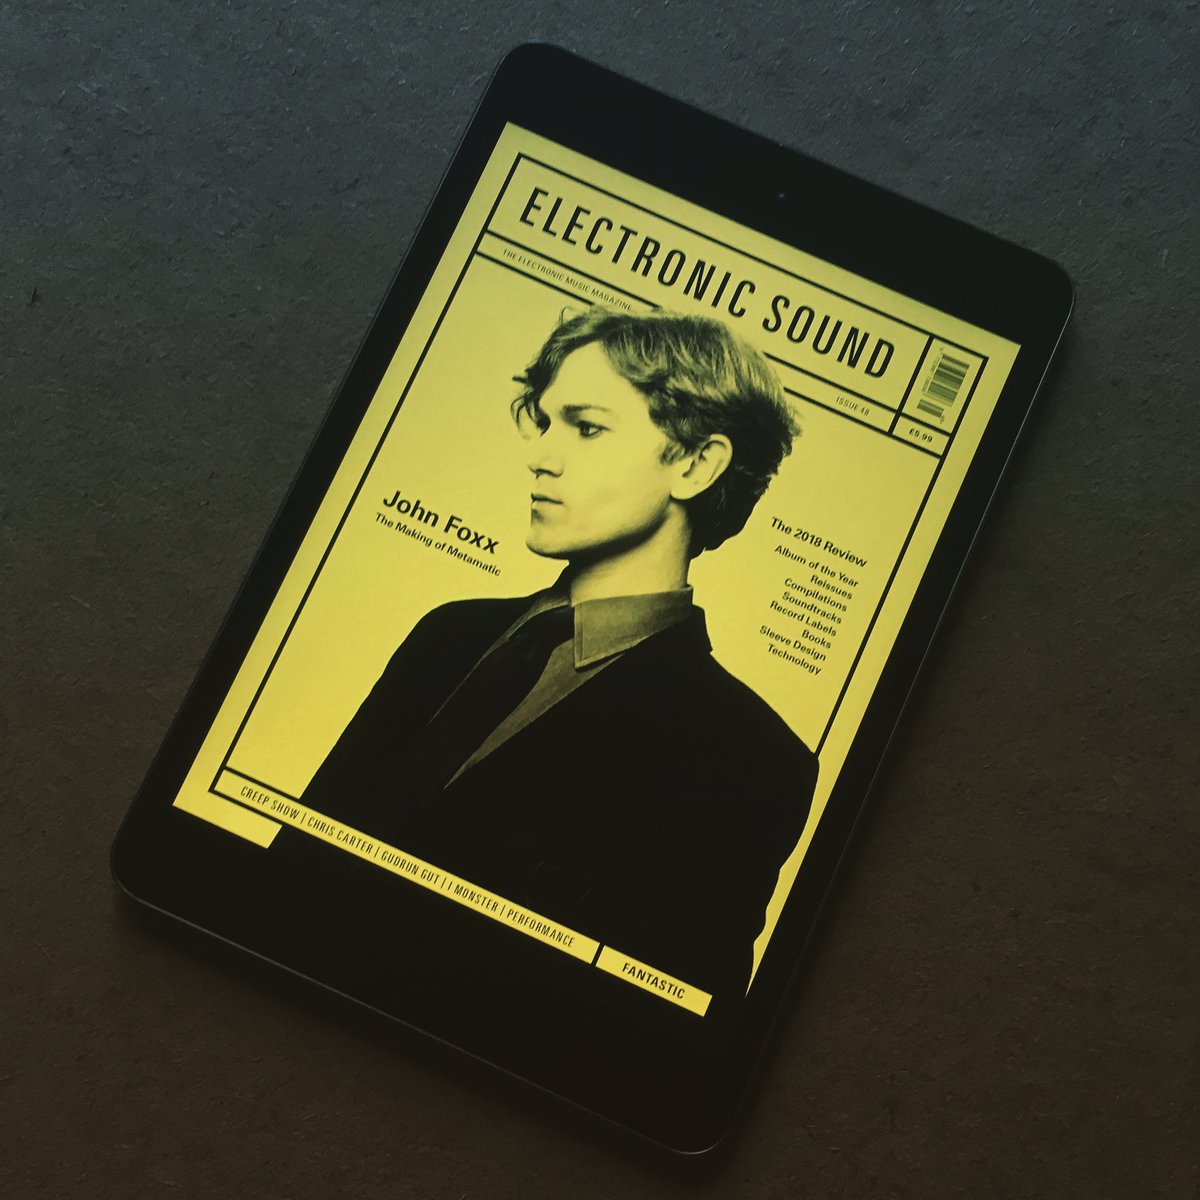 Excellent new issue of @ElectronicMagUK #NowReading on the iPad app #electronicsound